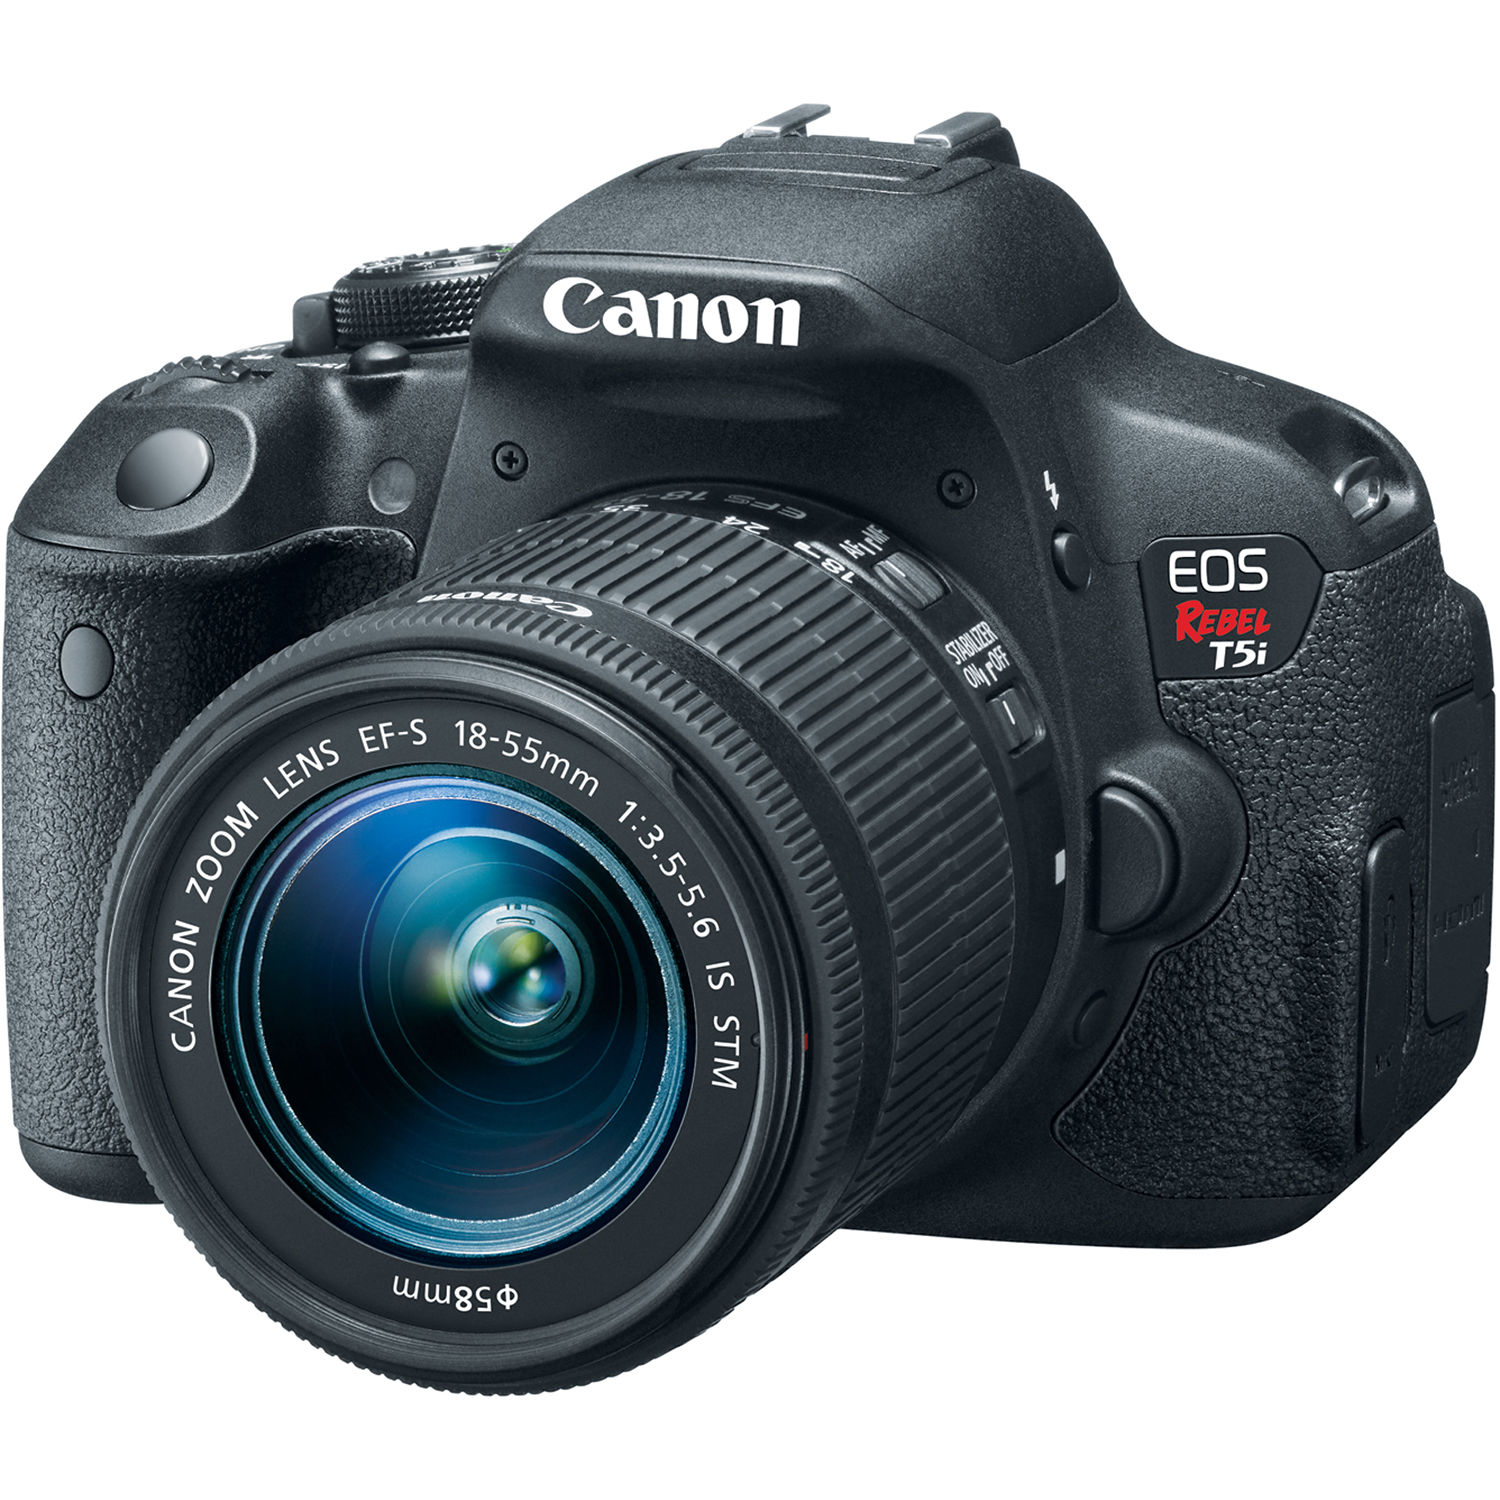 Canon T5i EOS Rebel DSLR Camera with 18-55mm Lens 8595B003 B&H